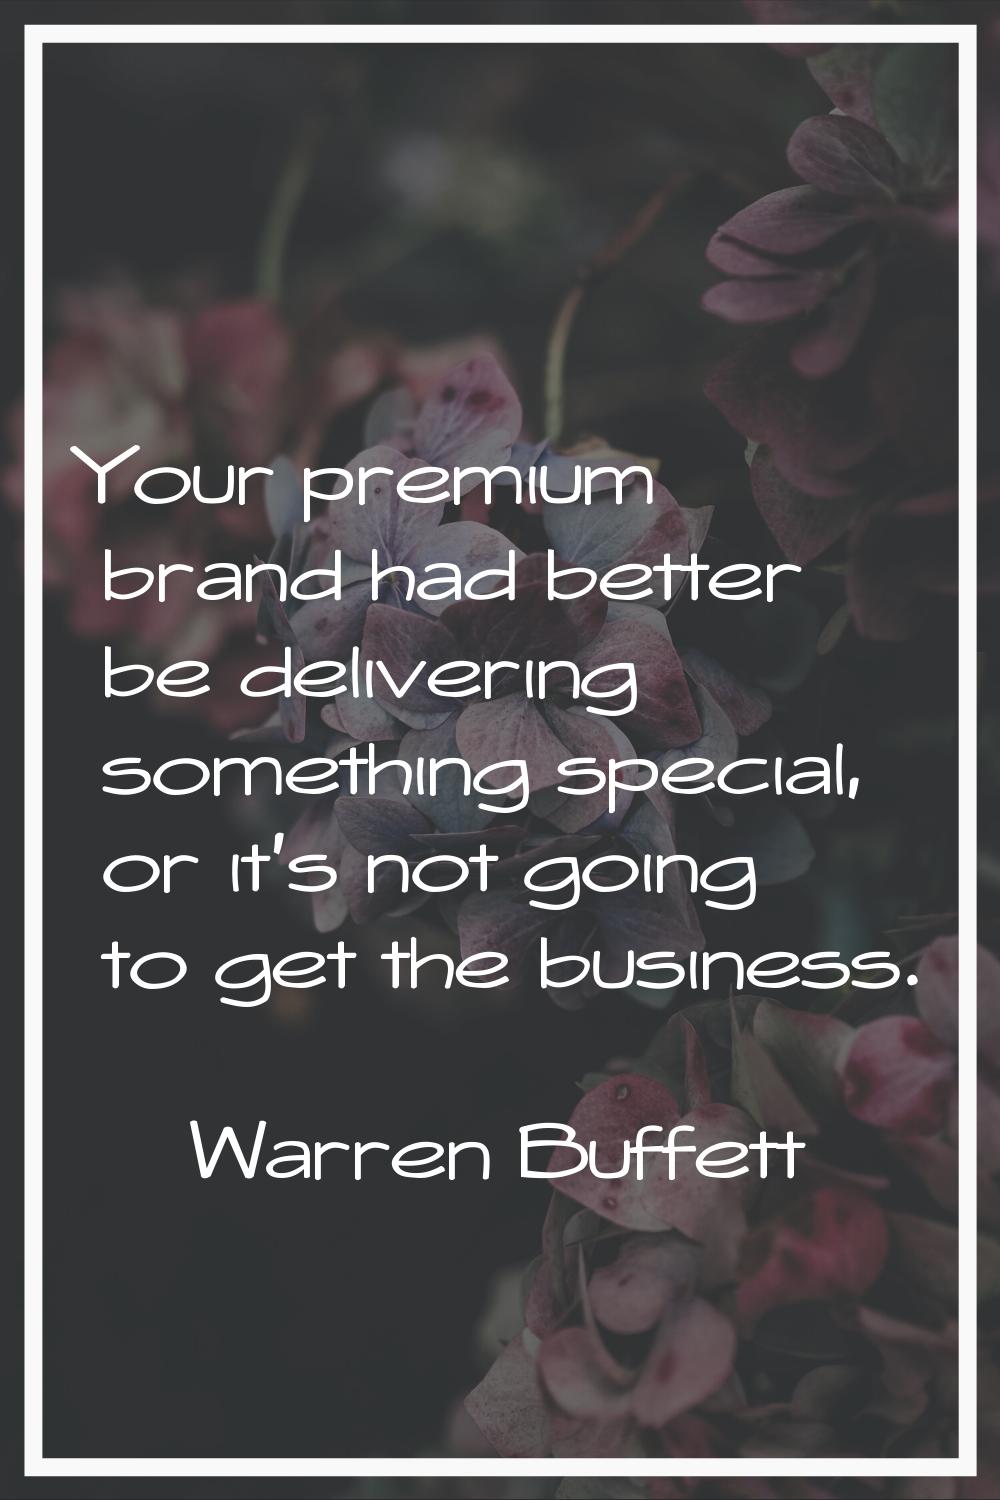 Your premium brand had better be delivering something special, or it's not going to get the busines